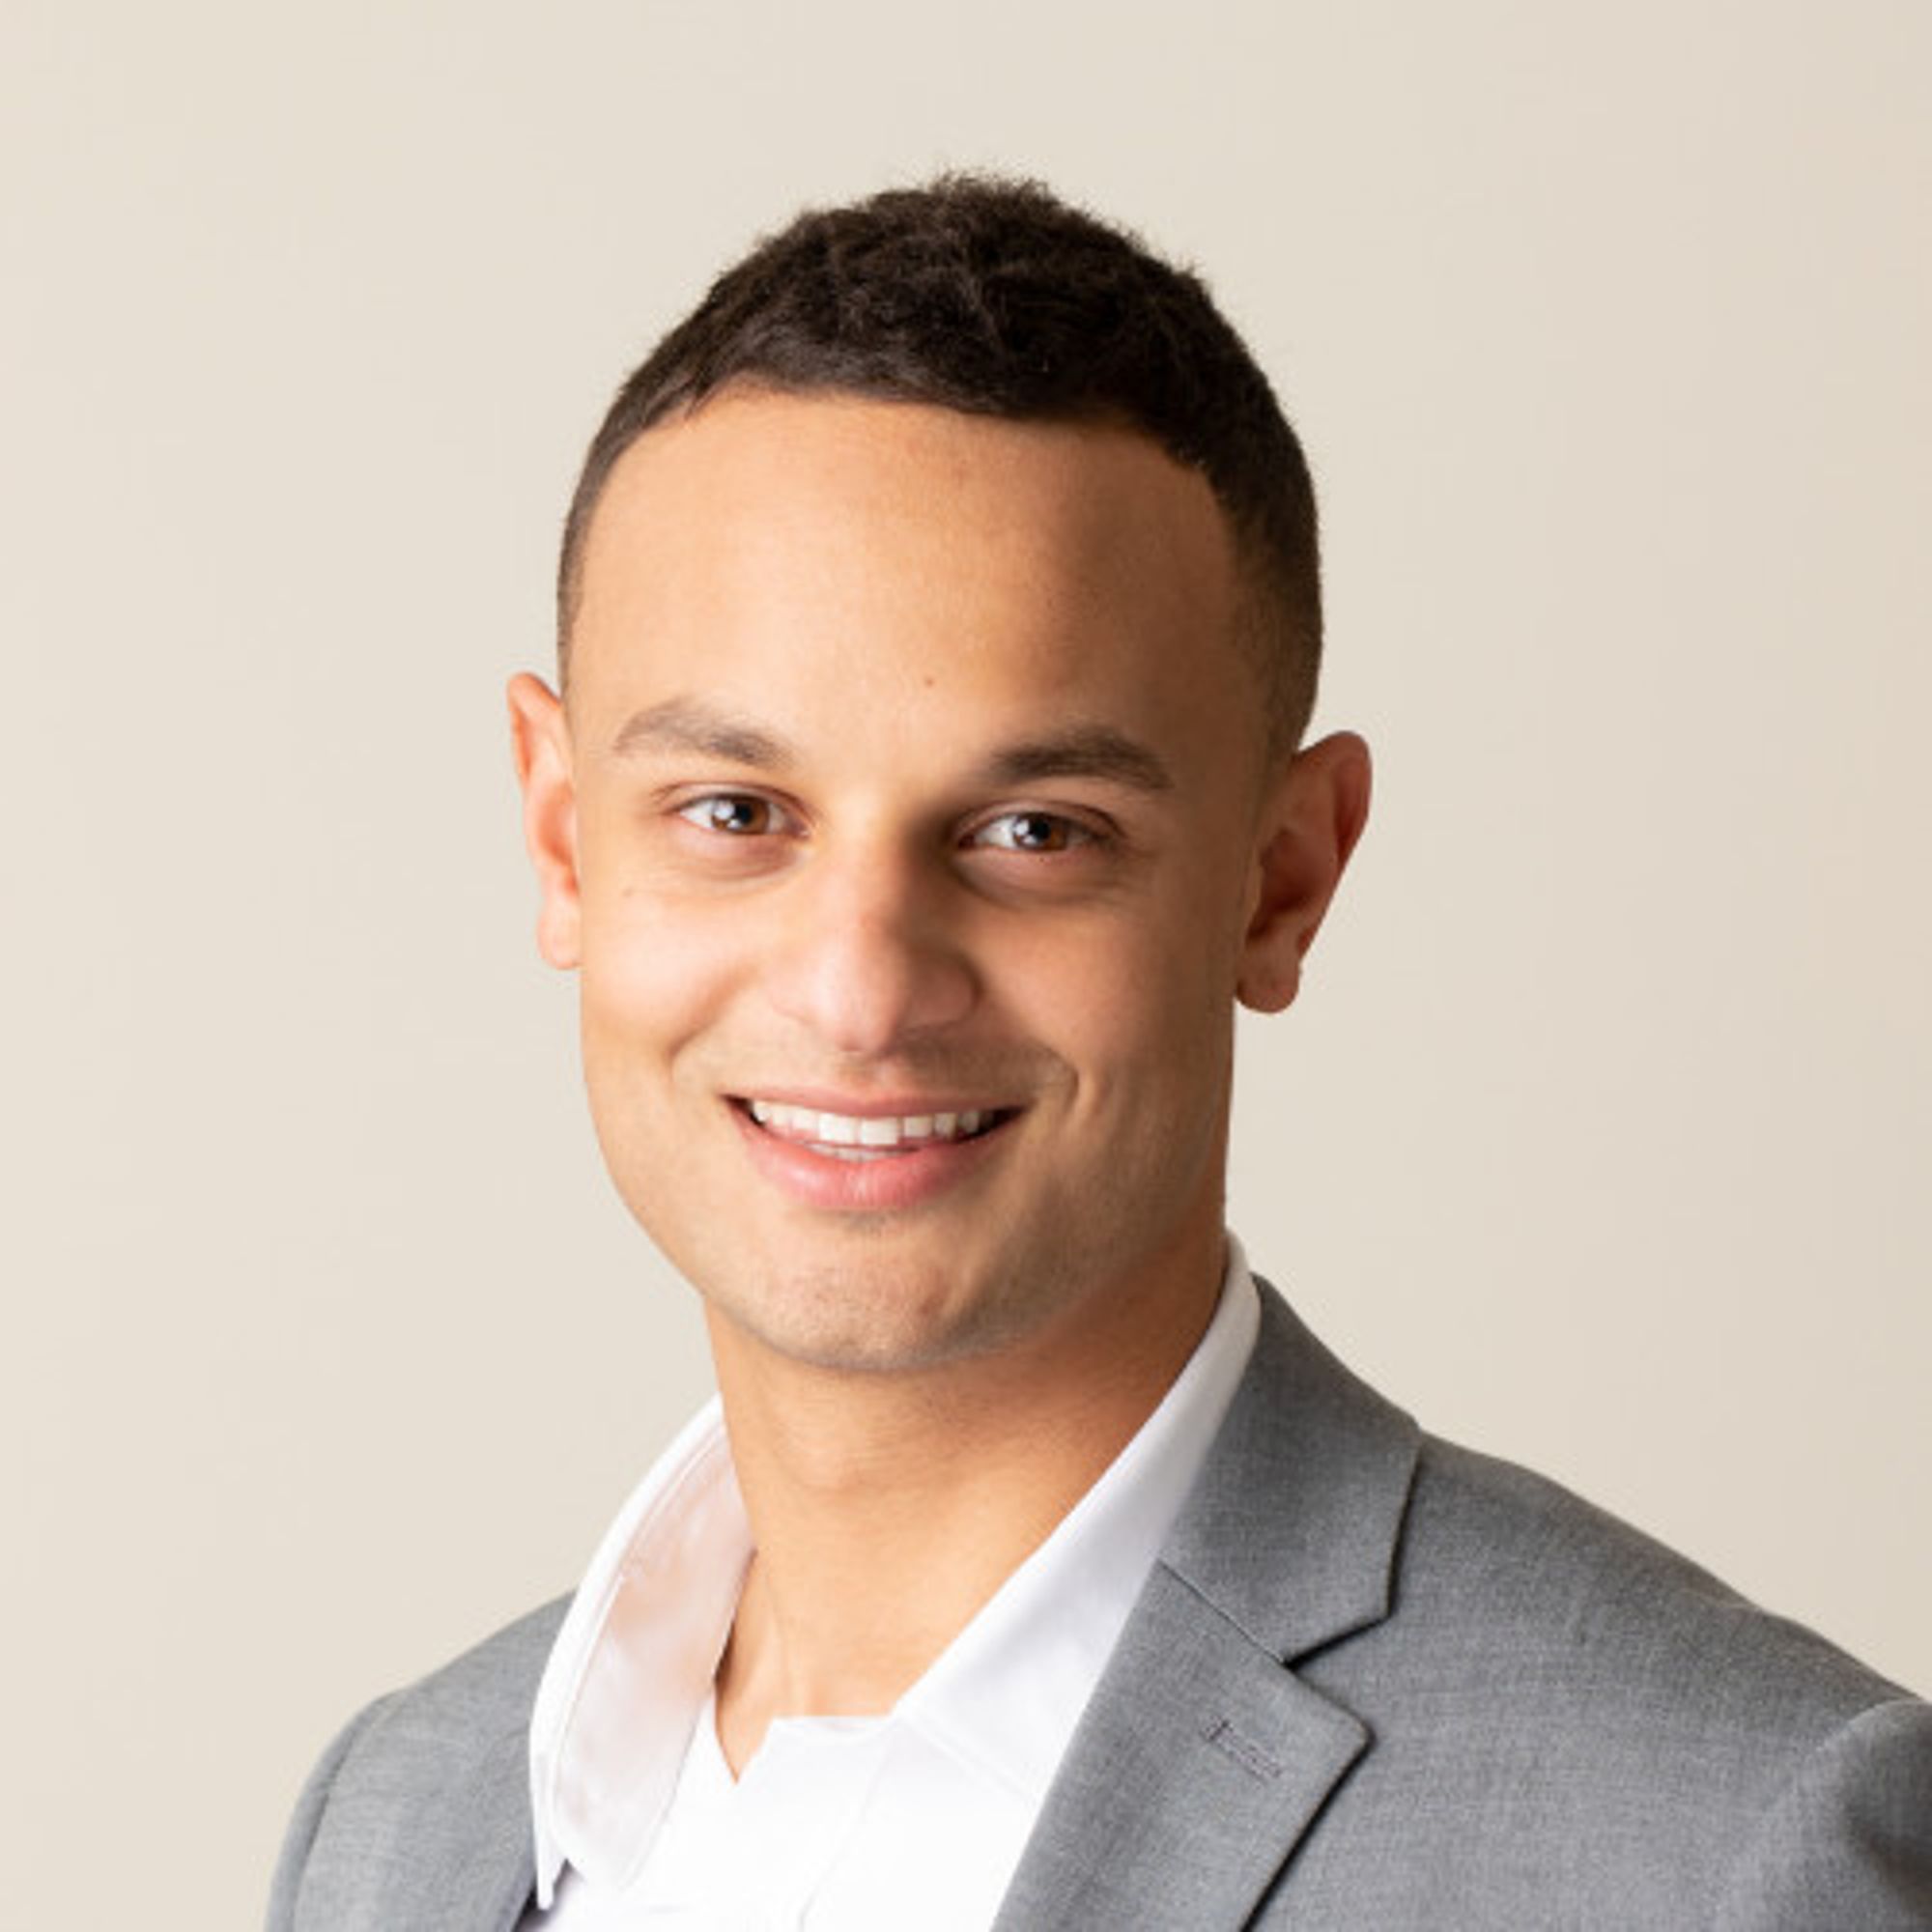 Miles Campbell
Account Executive
Prior #1 SDR, BDR, SMB AE @Salesforce • Soccer enthusiast, avid reader, part-time vegan